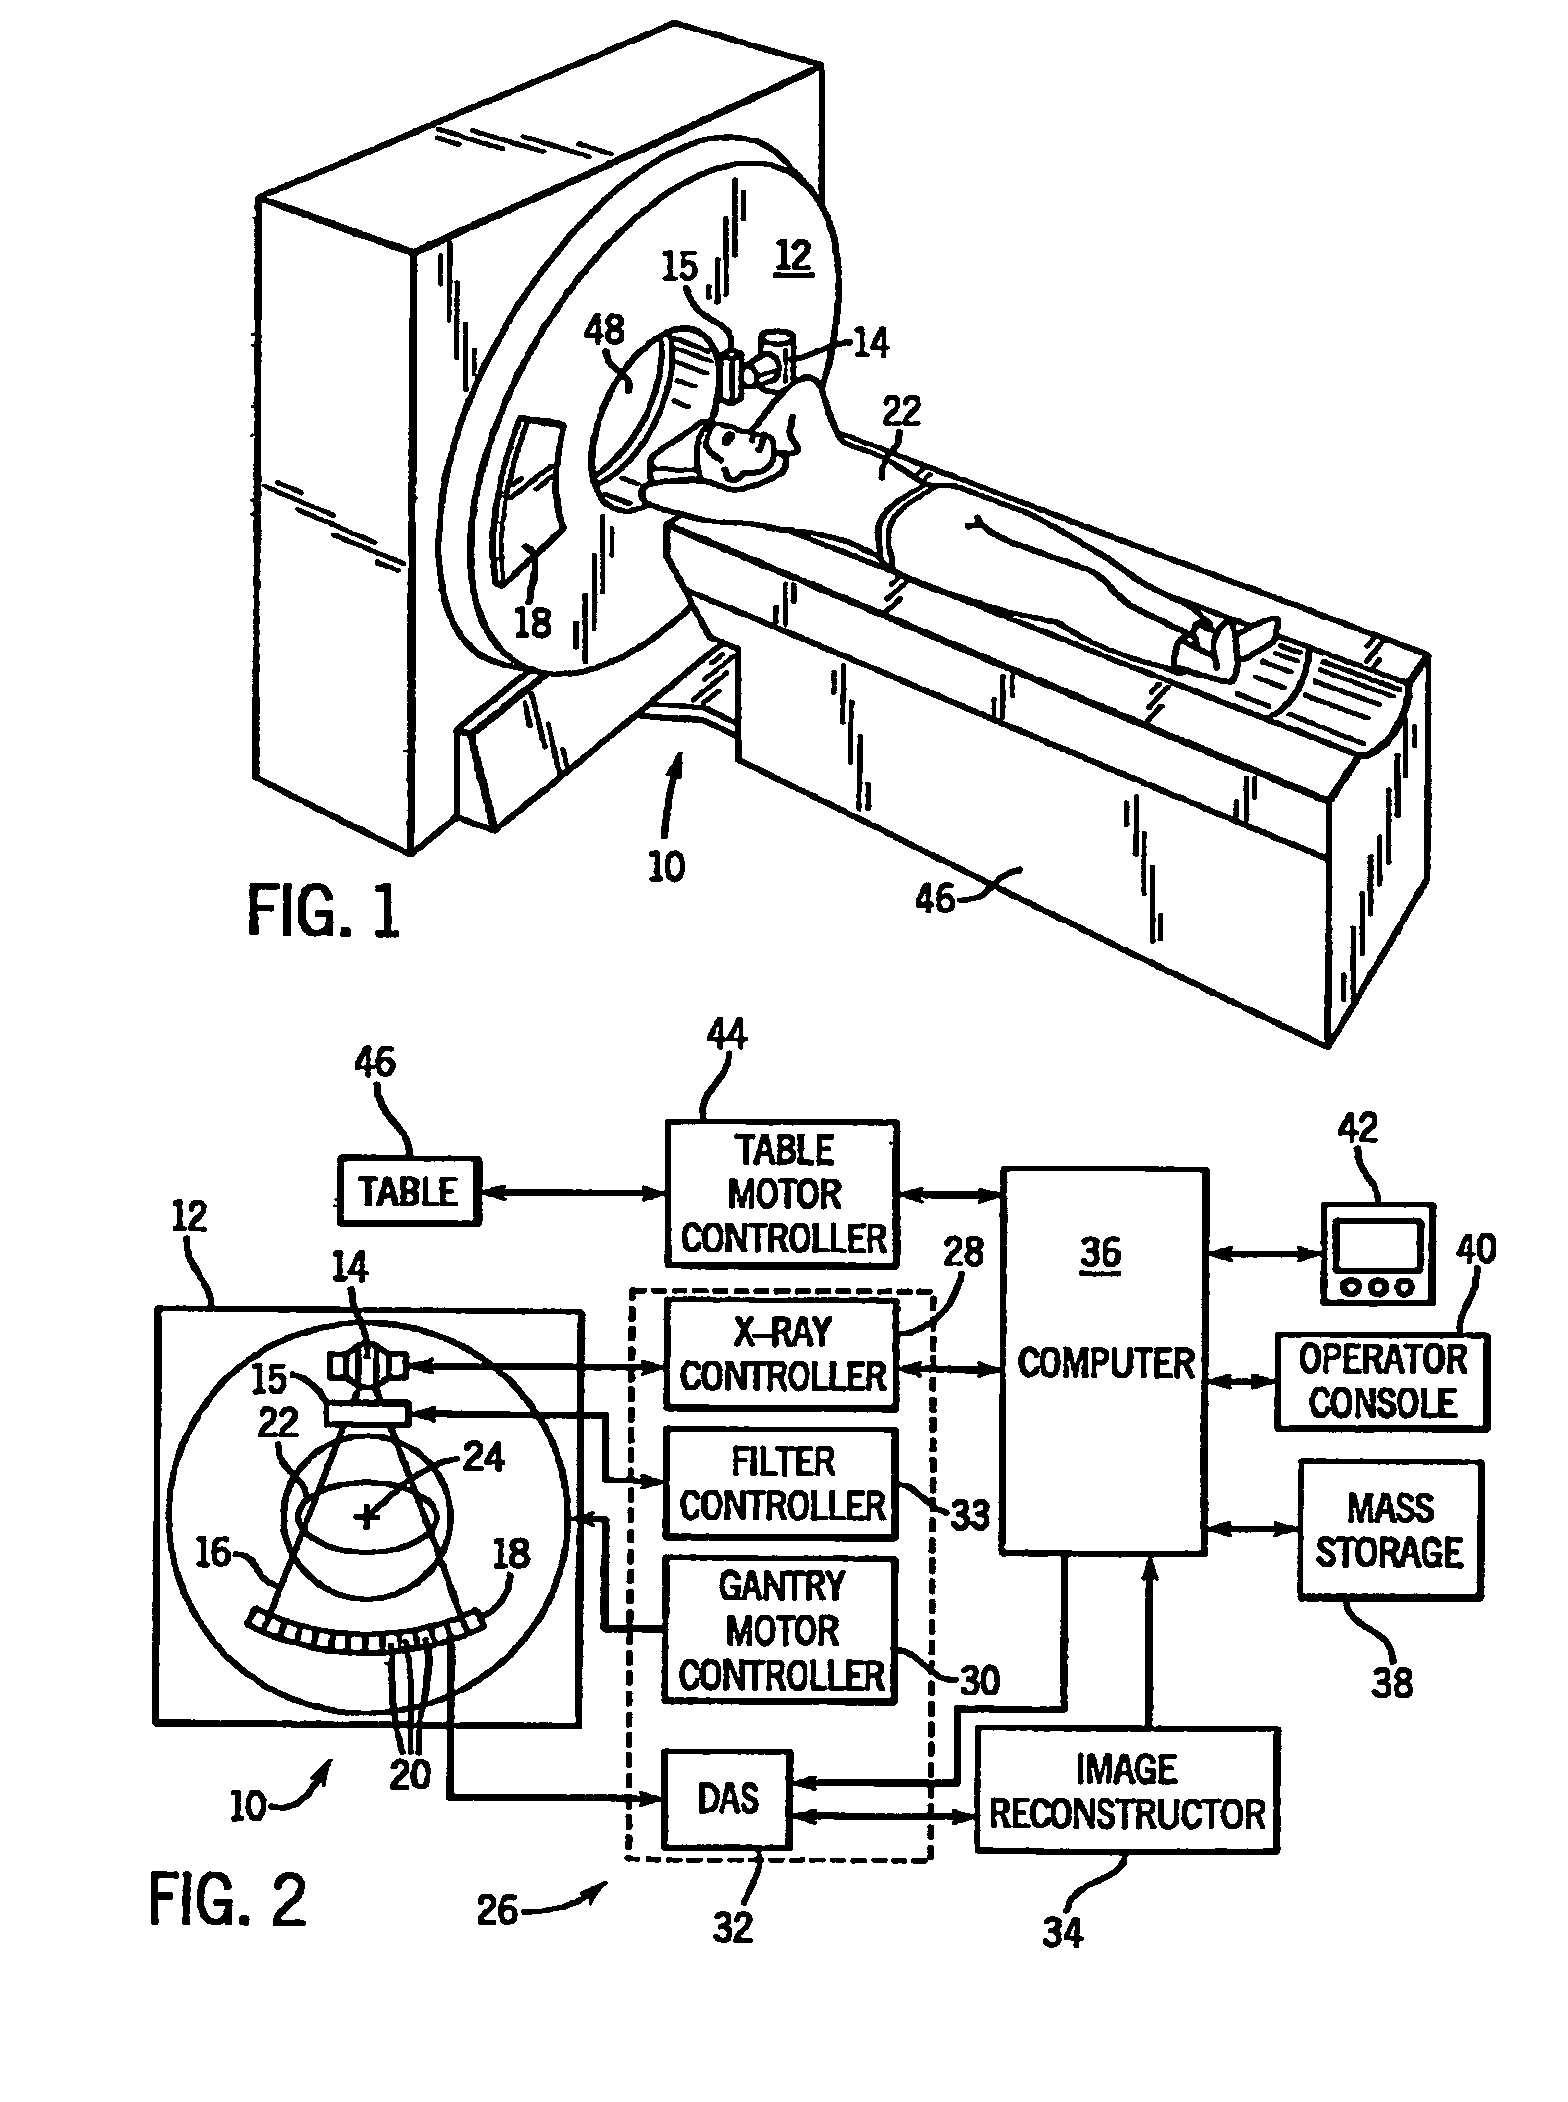 Method and apparatus of modulating the filtering of radiation during radiographic imaging